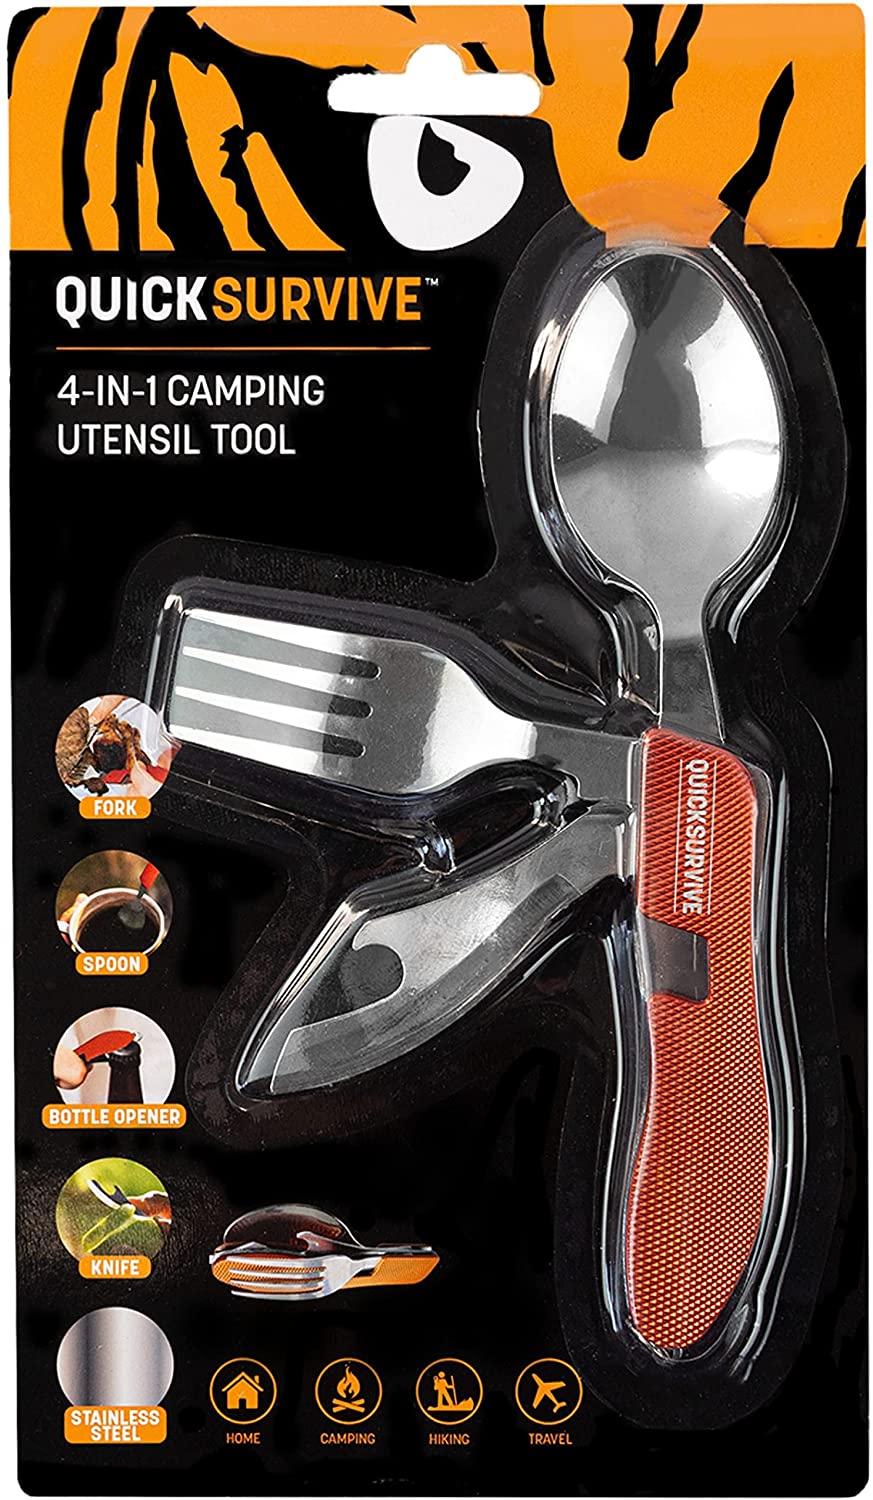 4-in-1 Pocket Camping Utensil Tool Stainless Steel Fork, Knife, Spoon, Bottle Opener by Quick Survive